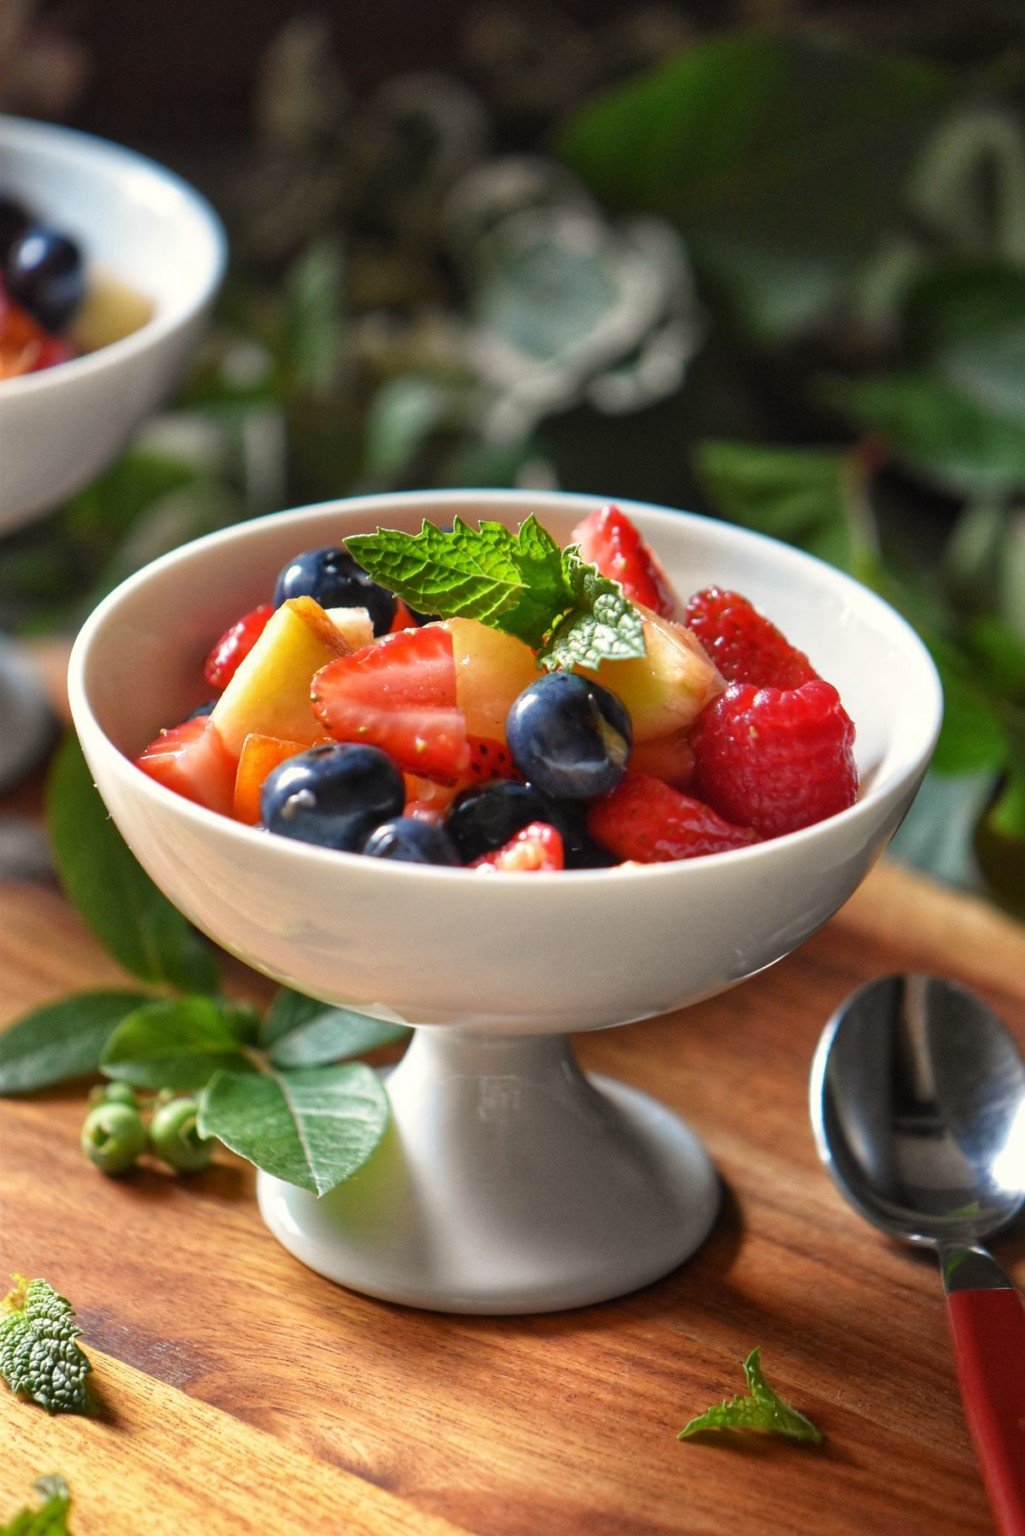 Delicious English Fruit Salad Recipe: A Refreshing and Healthy Option